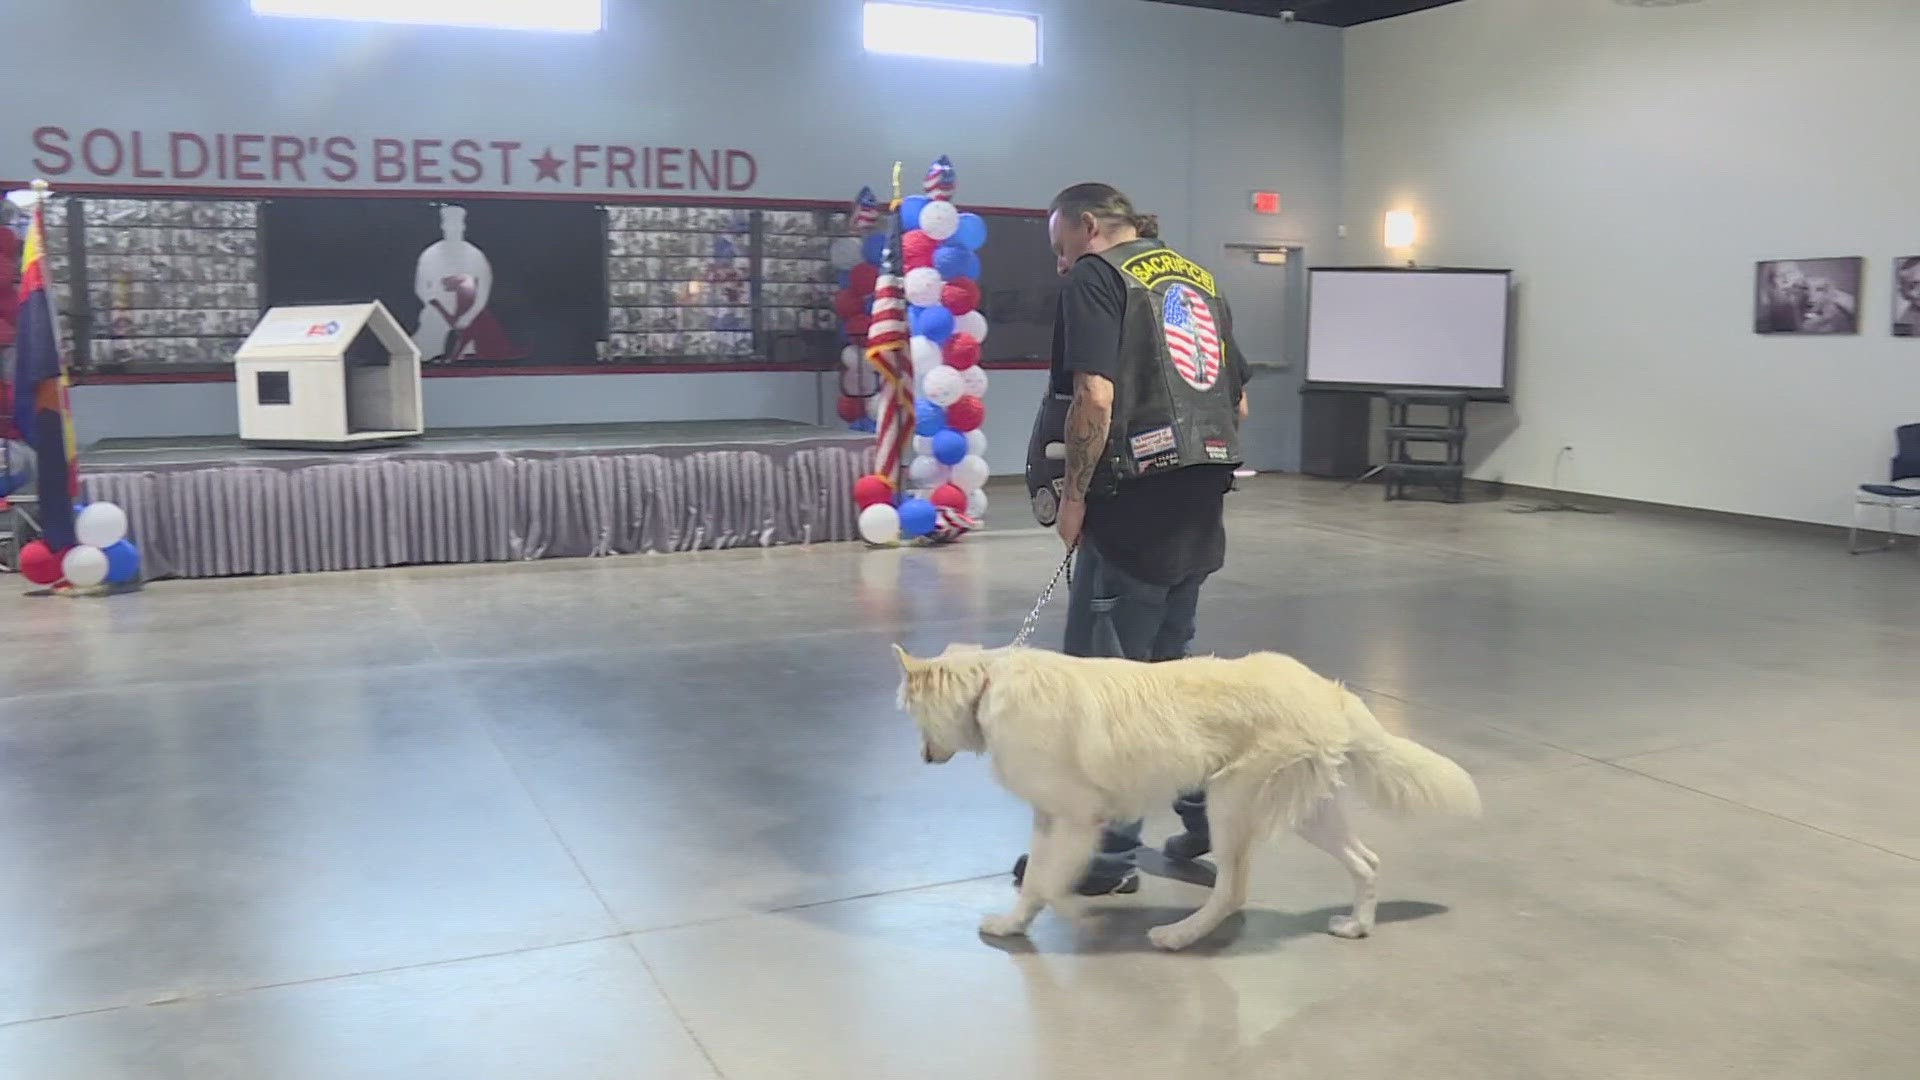 The nonprofit organization pairs dogs rescued from shelters with veterans dealing with PTSD.